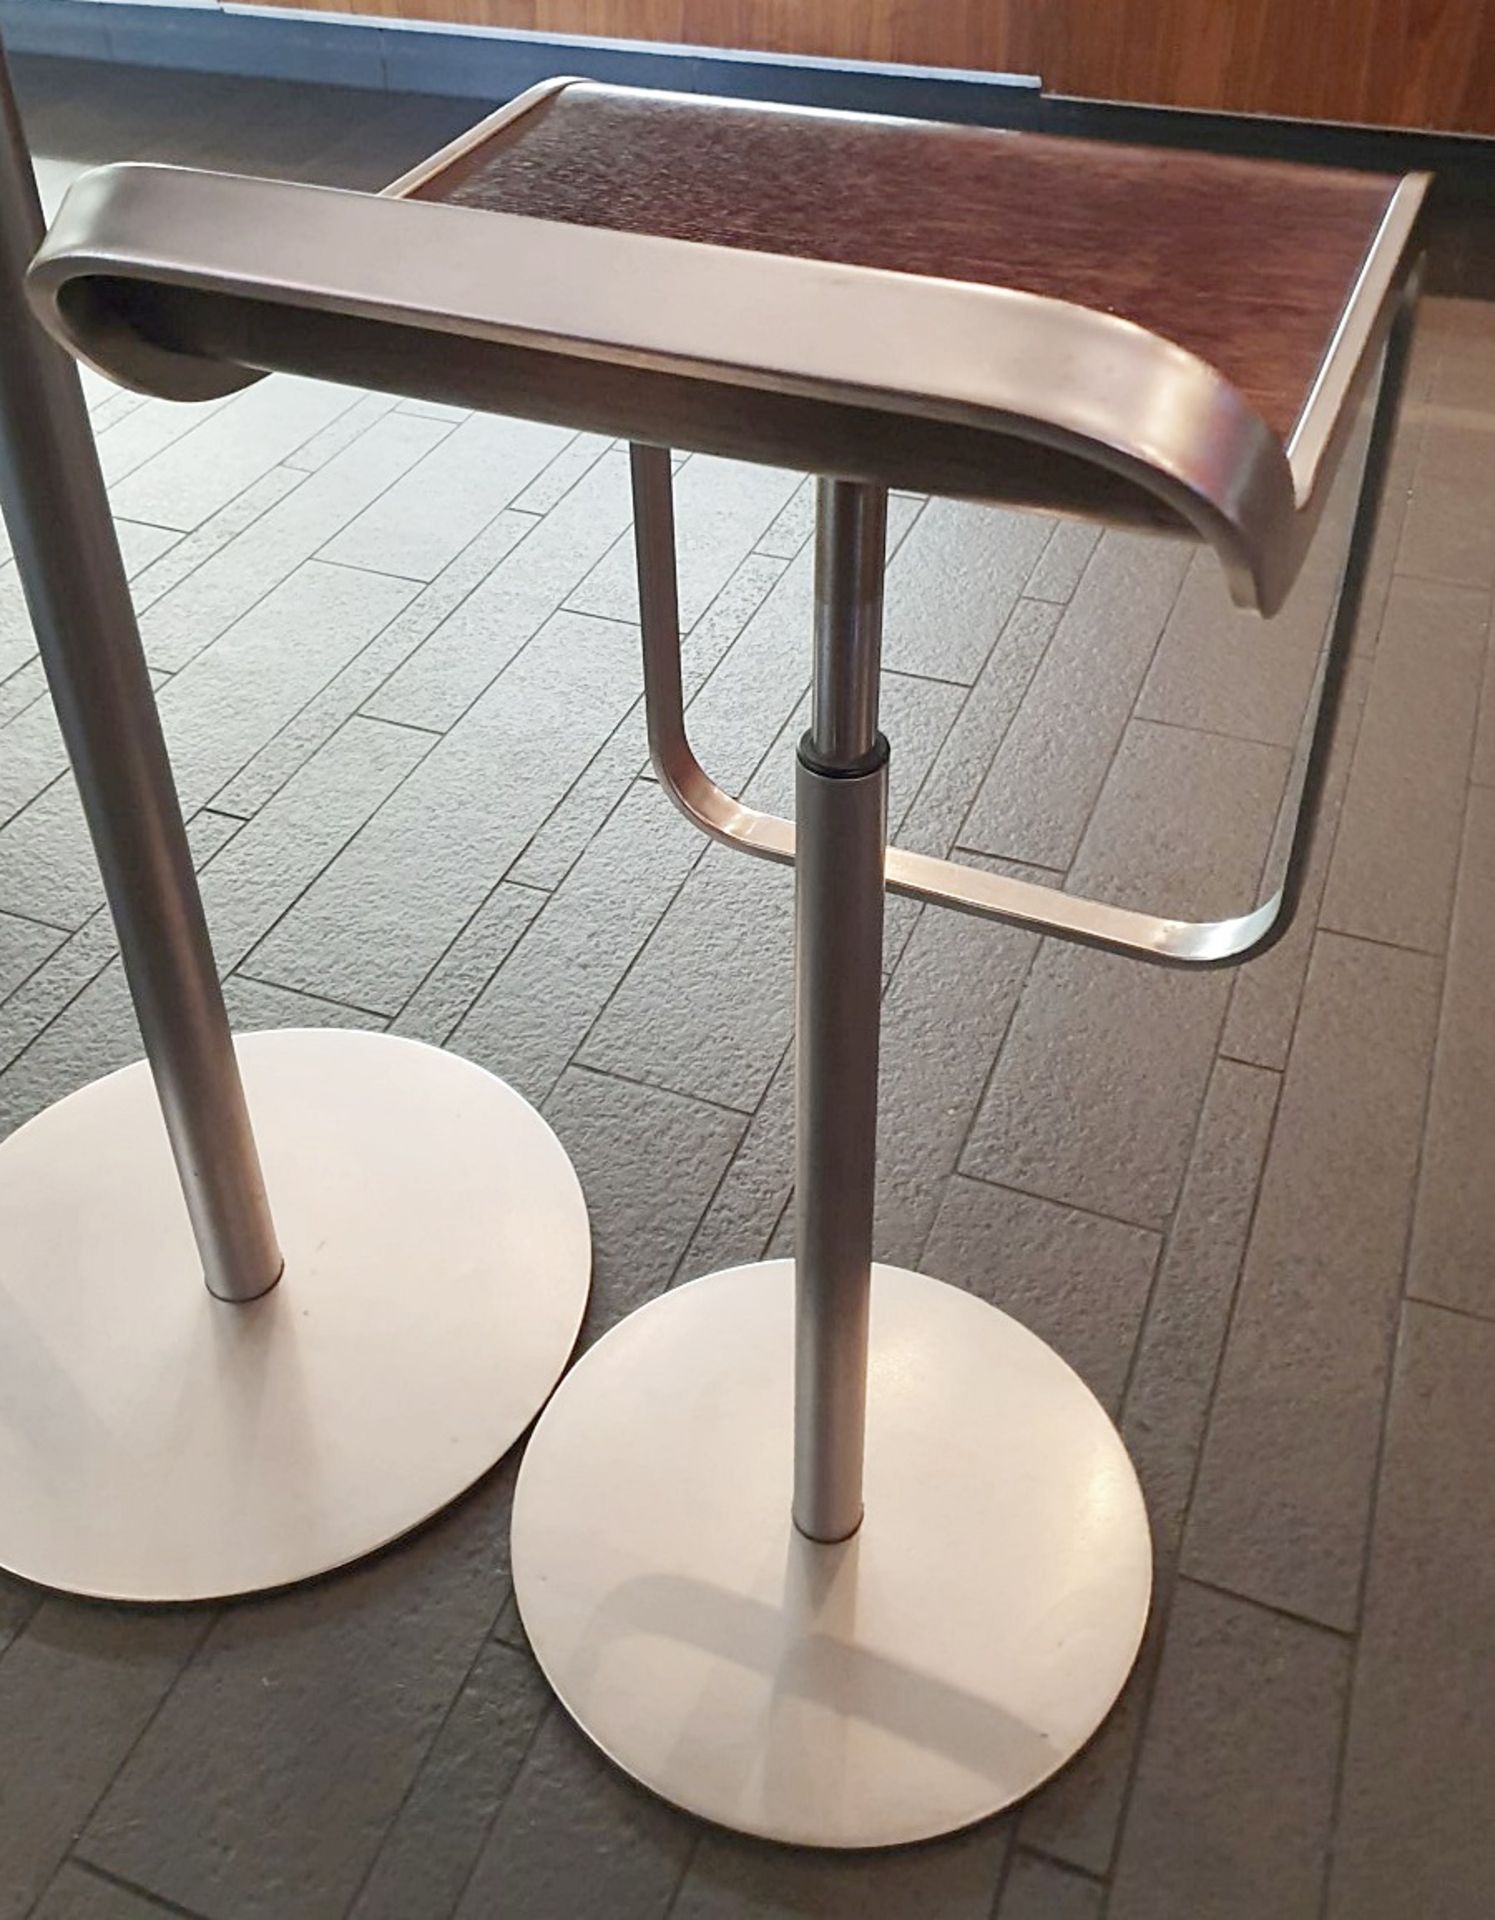 5 x Heavy Duty Commercial Bar Stools With Adjustable Hydraulic Aided Height - Dimensions: 35cm x - Image 5 of 8